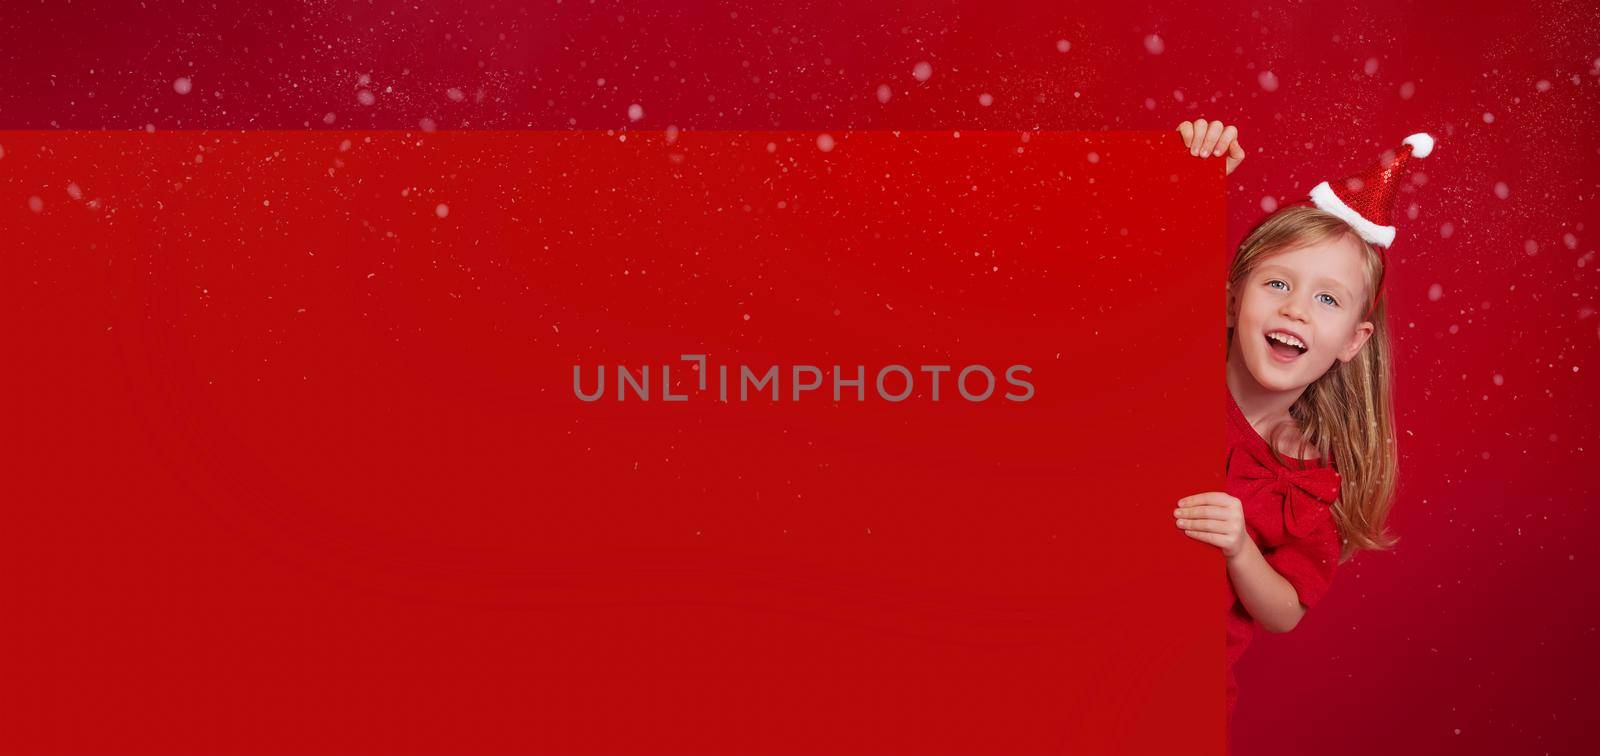 Merry Christmas poster copy paste. girl dressed as Santa Claus on a red background by Ramanouskaya